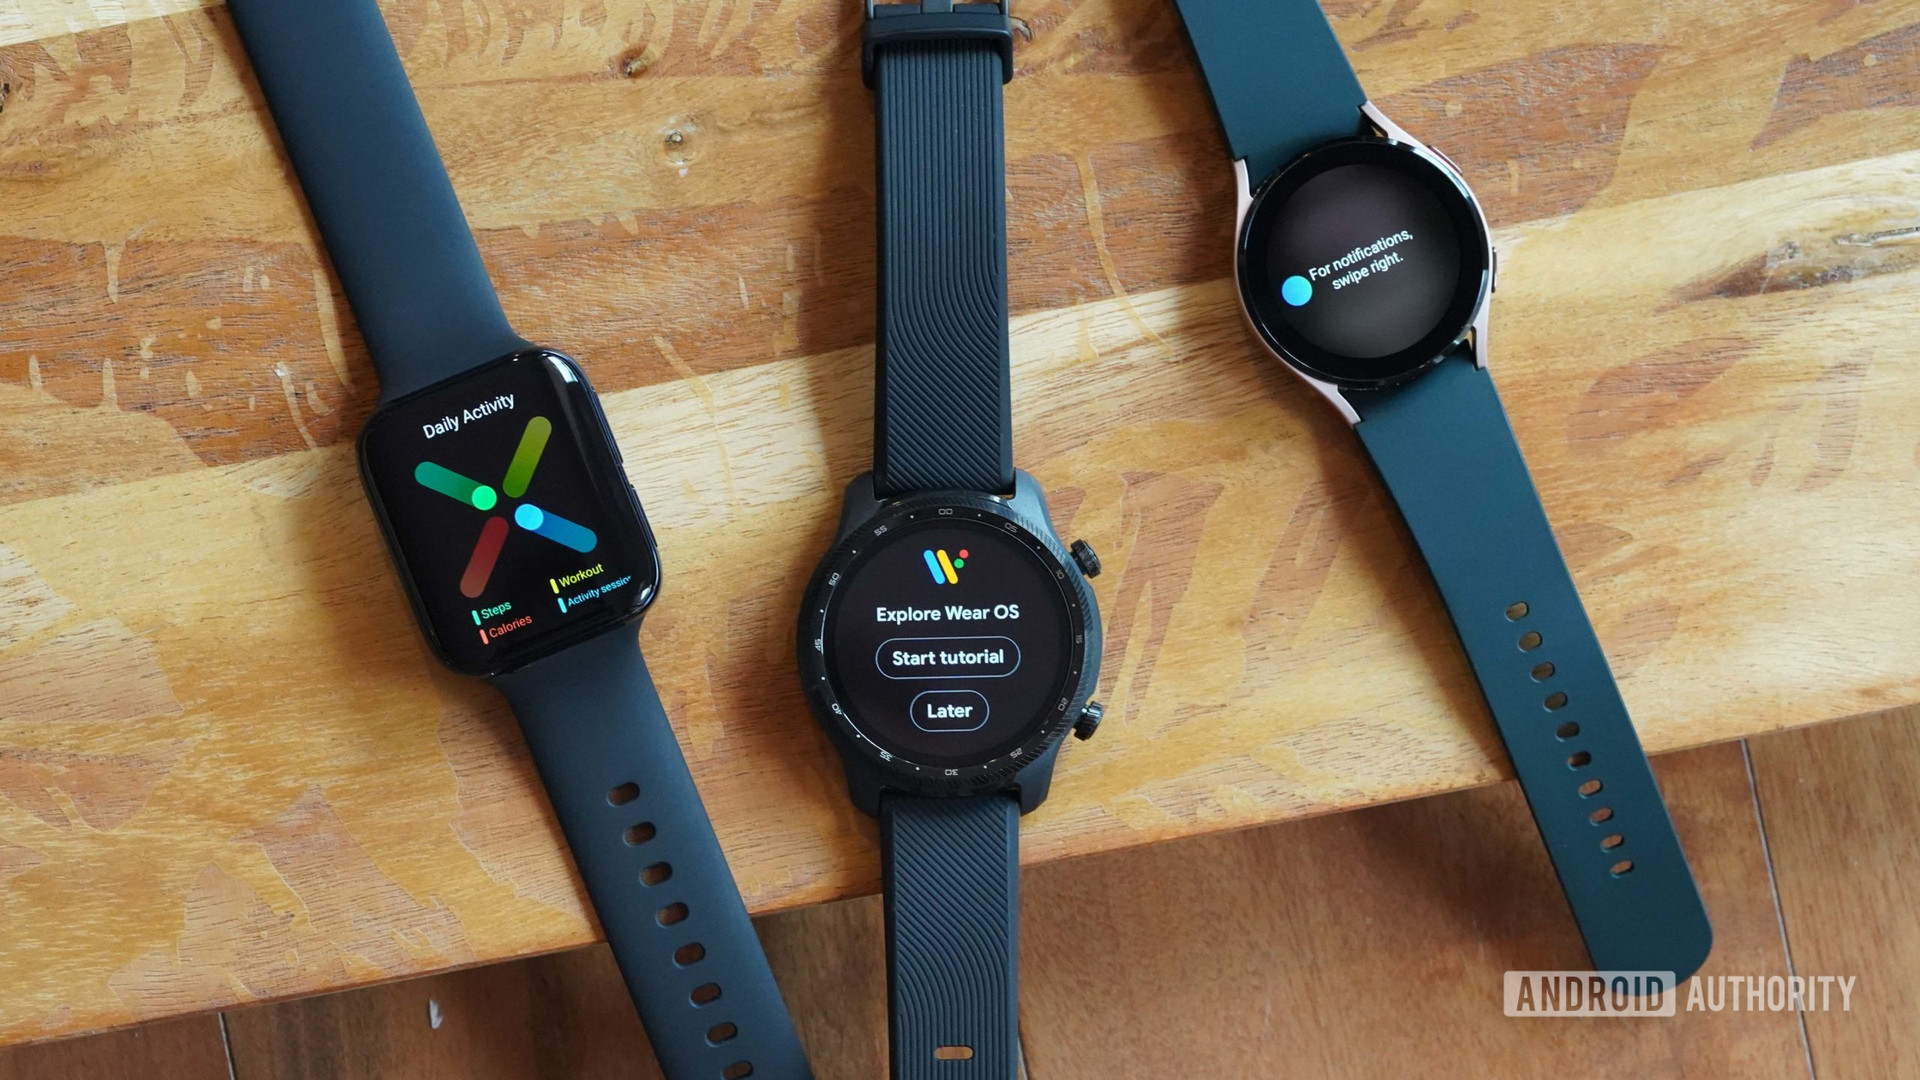 An Oppo Watch, a TicWatch Pro 3 Ultra, and a Galaxy Watch 4 rest on a wooden board, each displaying steps of the Wear OS tutorial.